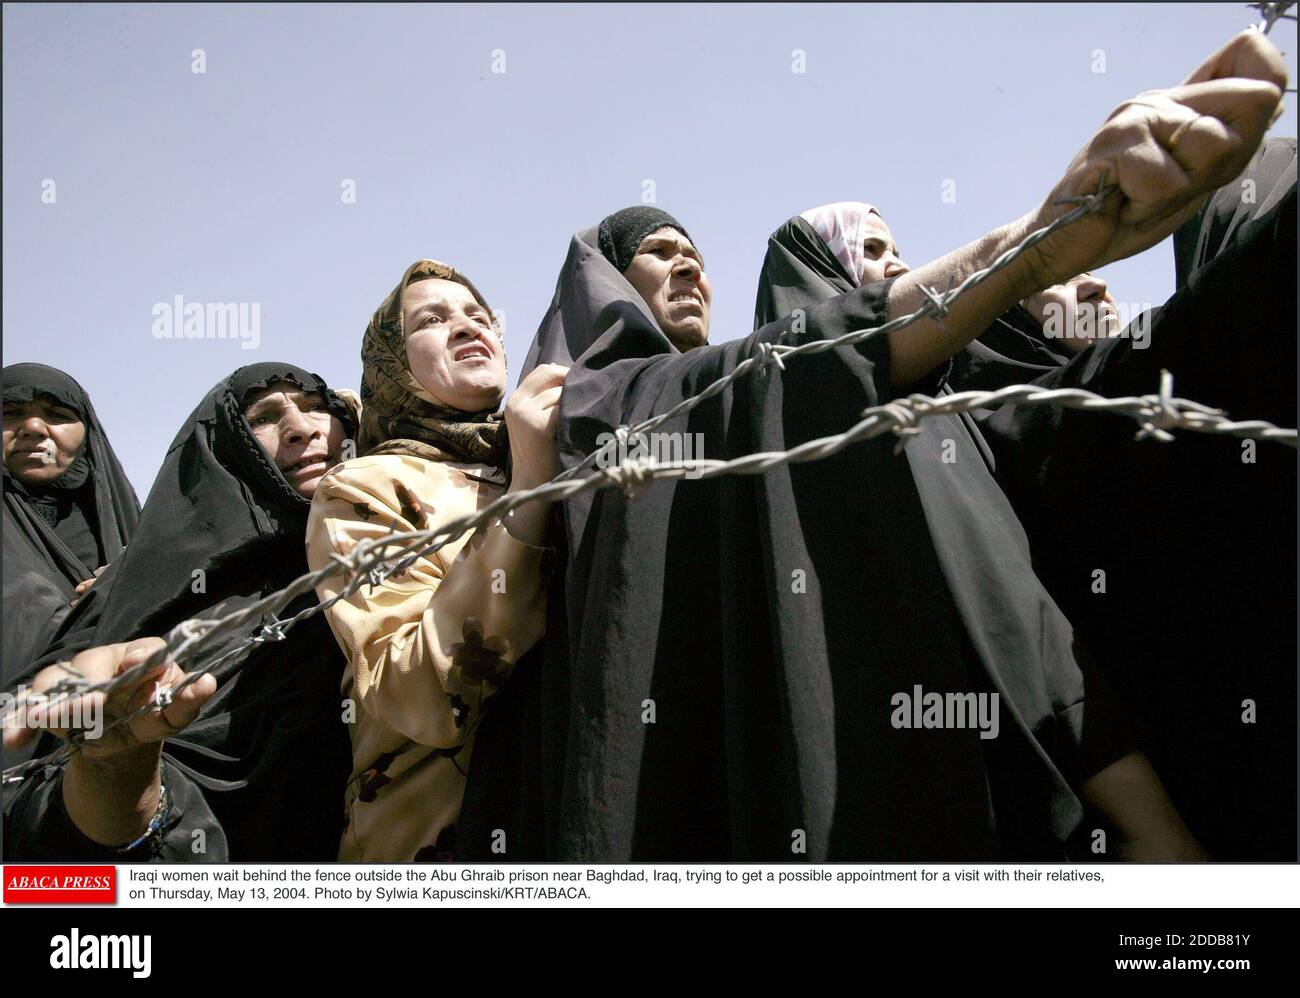 NO FILM, NO VIDEO, NO TV, NO DOCUMENTARY - Iraqi women wait behind the fence outside the Abu Ghraib prison near Baghdad, Iraq, trying to get a possible appointment for a visit with their relatives, on Thursday, May 13, 2004. Photo by Sylwia Kapuscinski/KRT/ABACA. Stock Photo